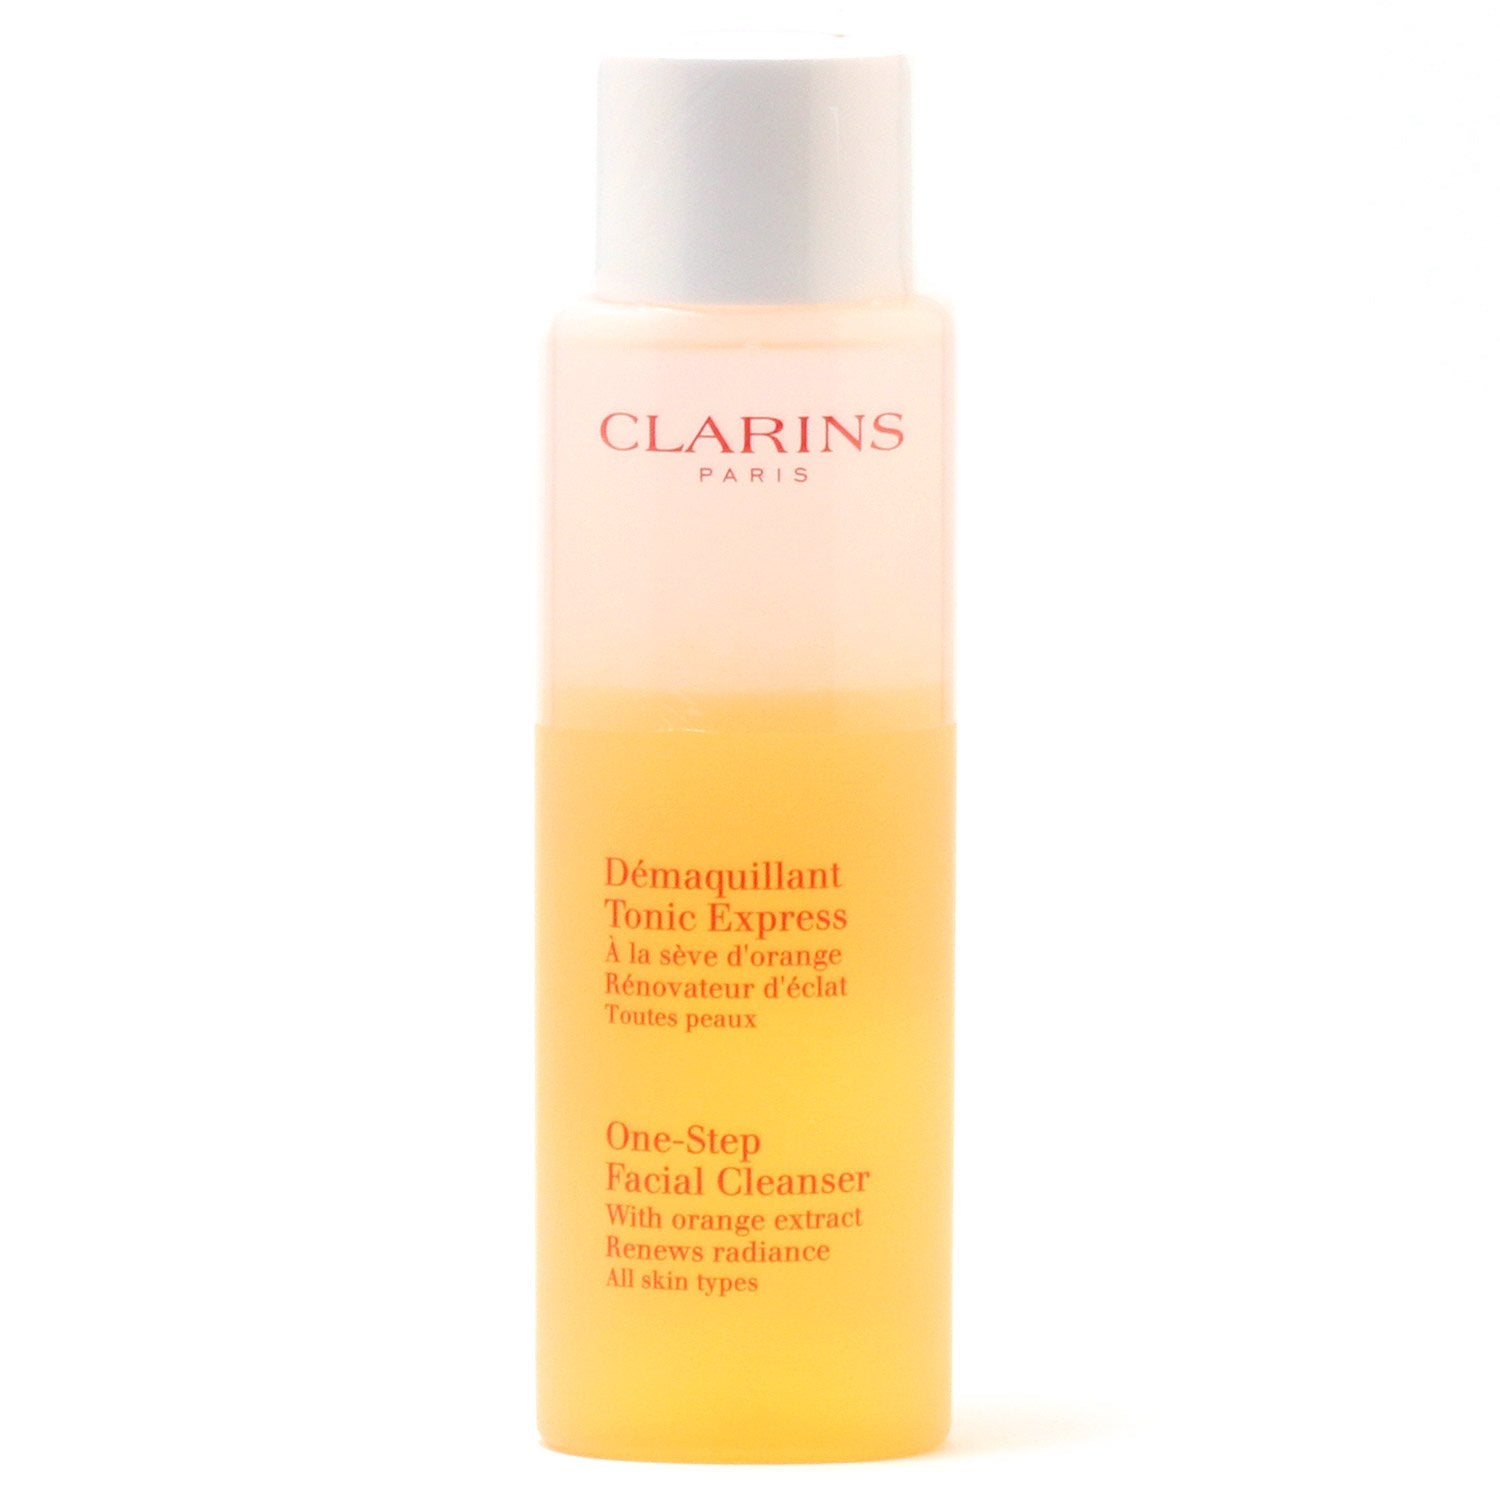 Skin Care - CLARINS ONE-STEP FACIAL CLEANSER WITH ORANGE EXTRACT RENEWS RADIANCE FOR ALL SKIN TYPES, 6.7 OZ